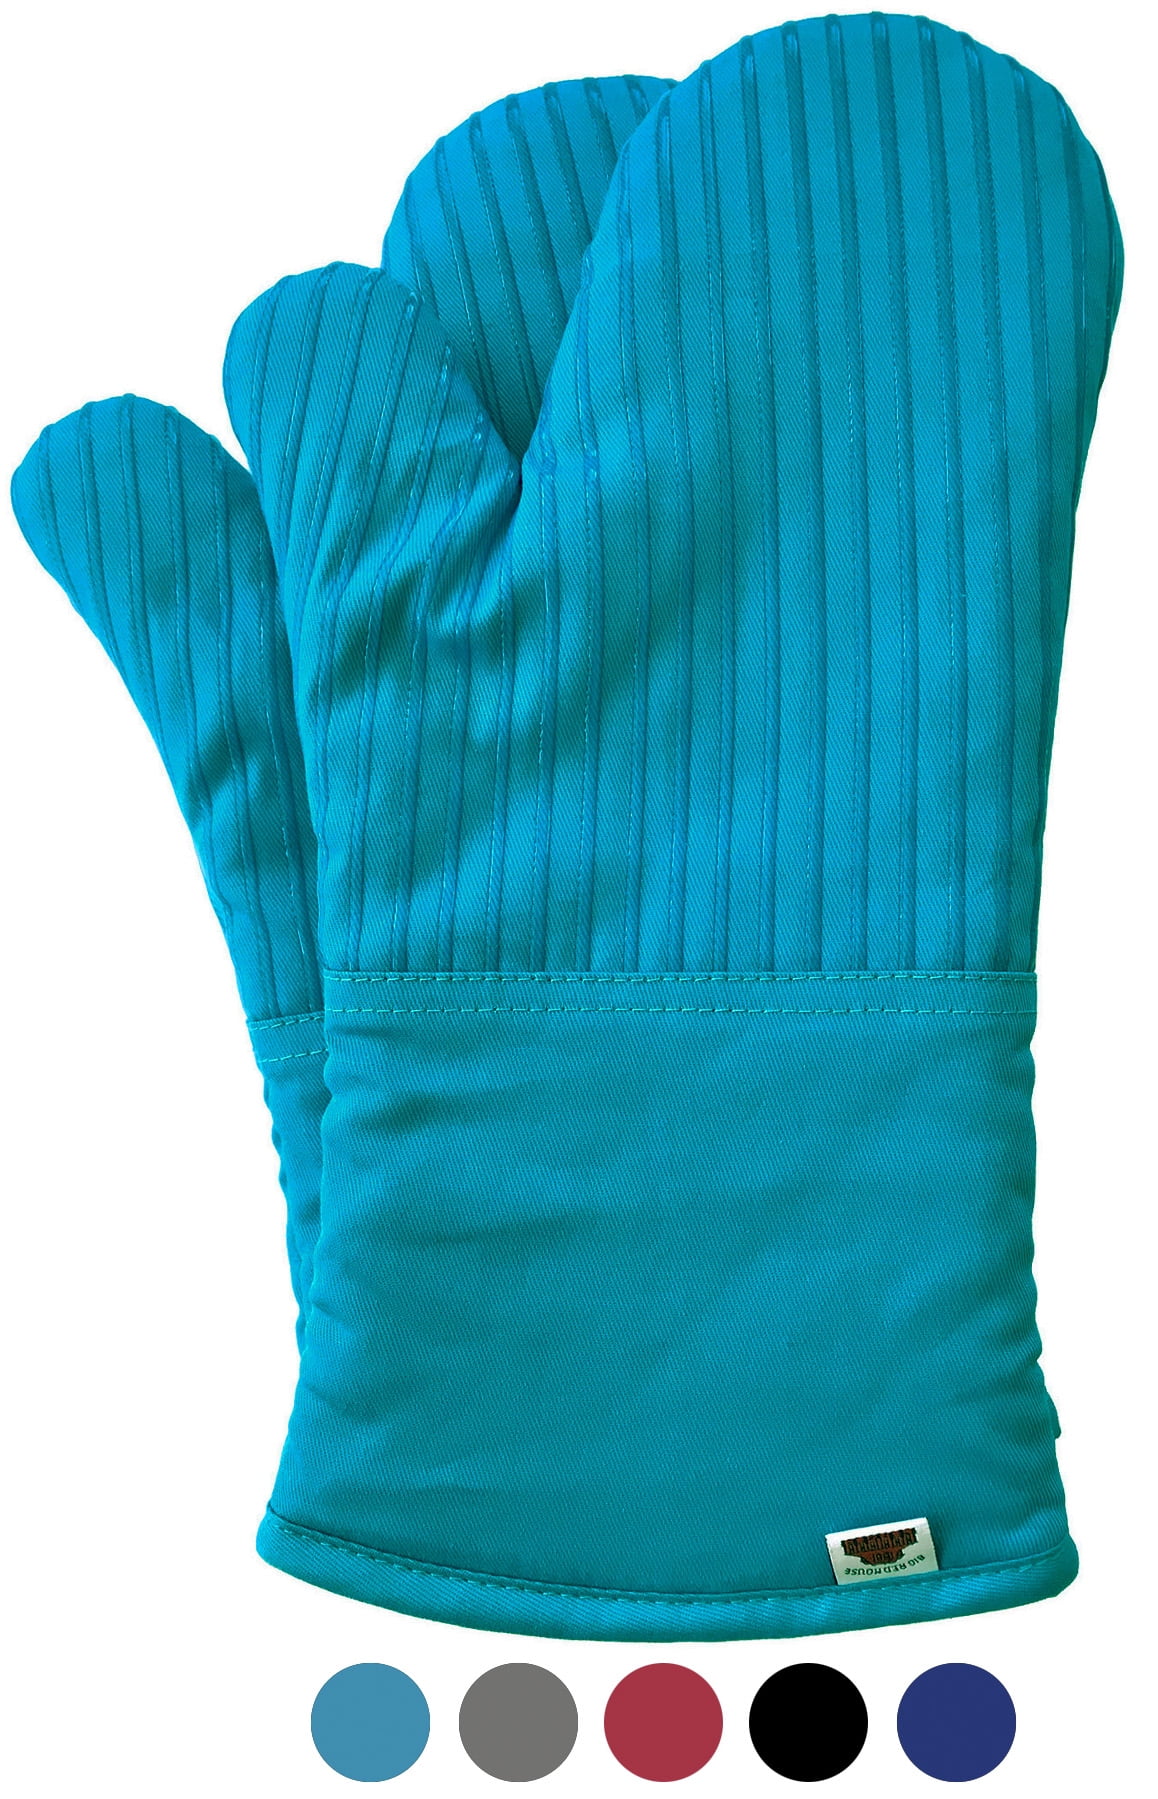 Lavish Home Silicone Oven Mitts - Extra Long Professional Quality Heat Resistant w/ Lining Red 14.75 x 5.5